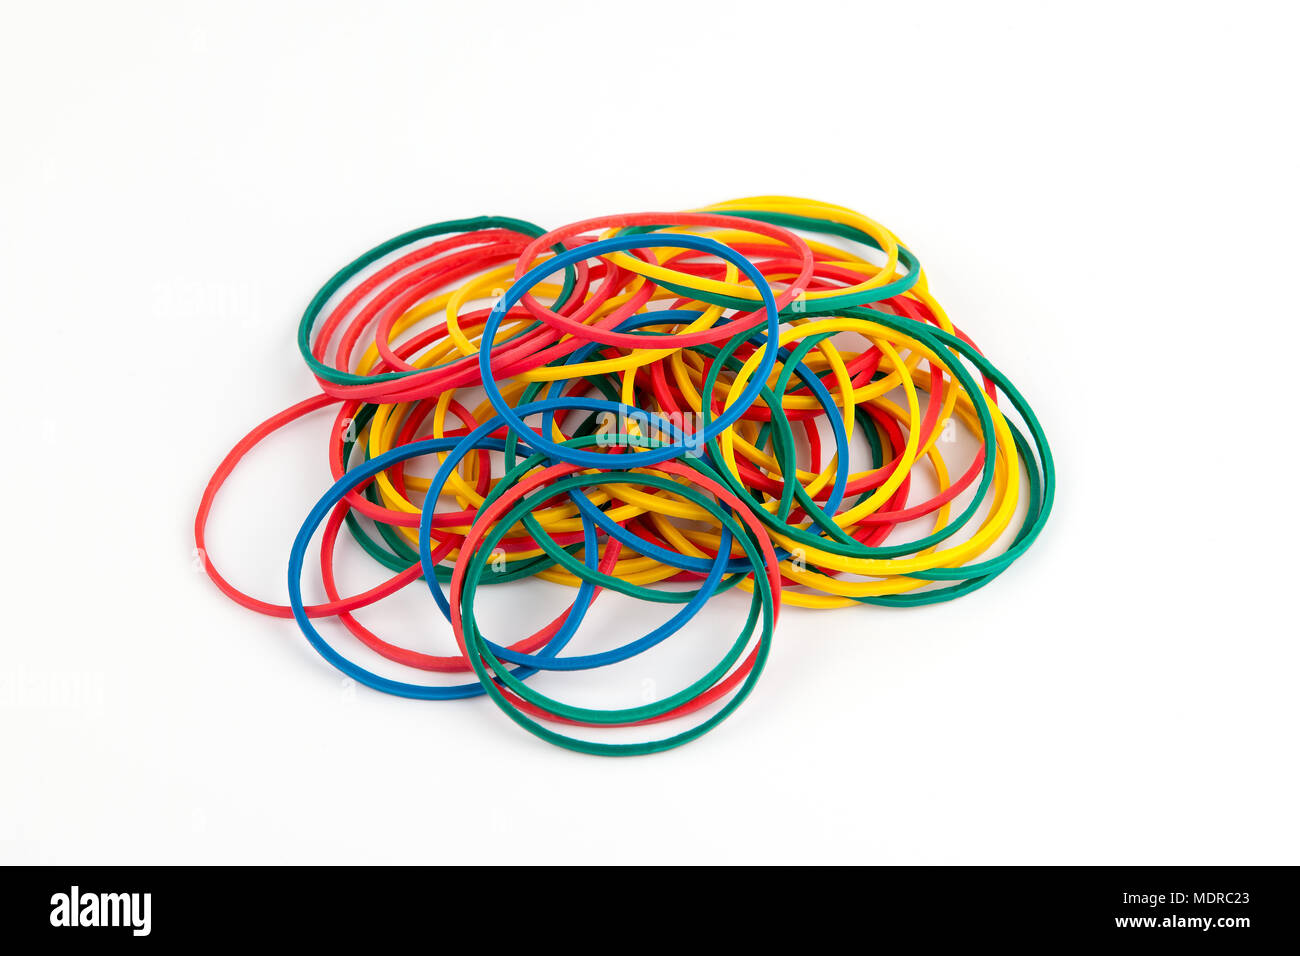 Collage of colorful rubber bands on white background Stock Photo - Alamy